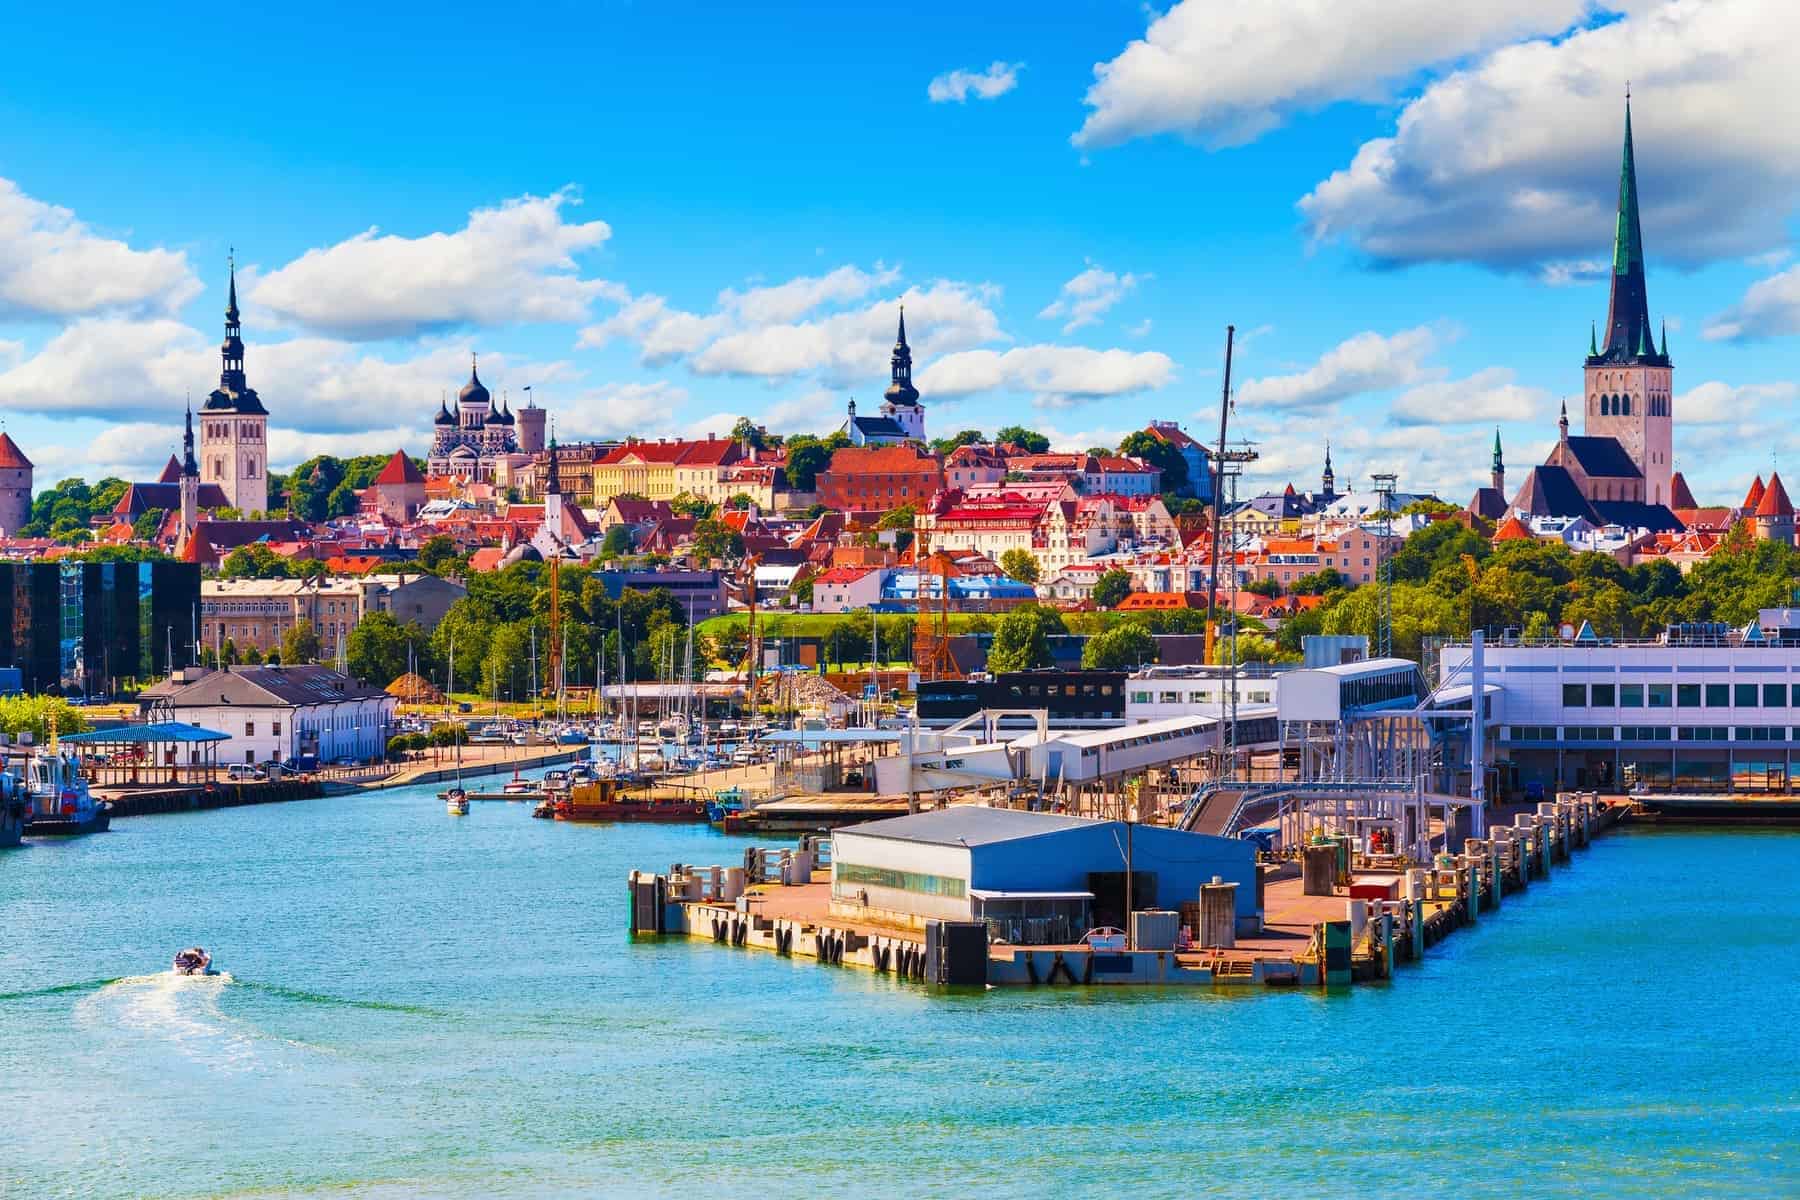 Scenic summer view of the Old Town and sea port harbor in Tallinn, Estonia